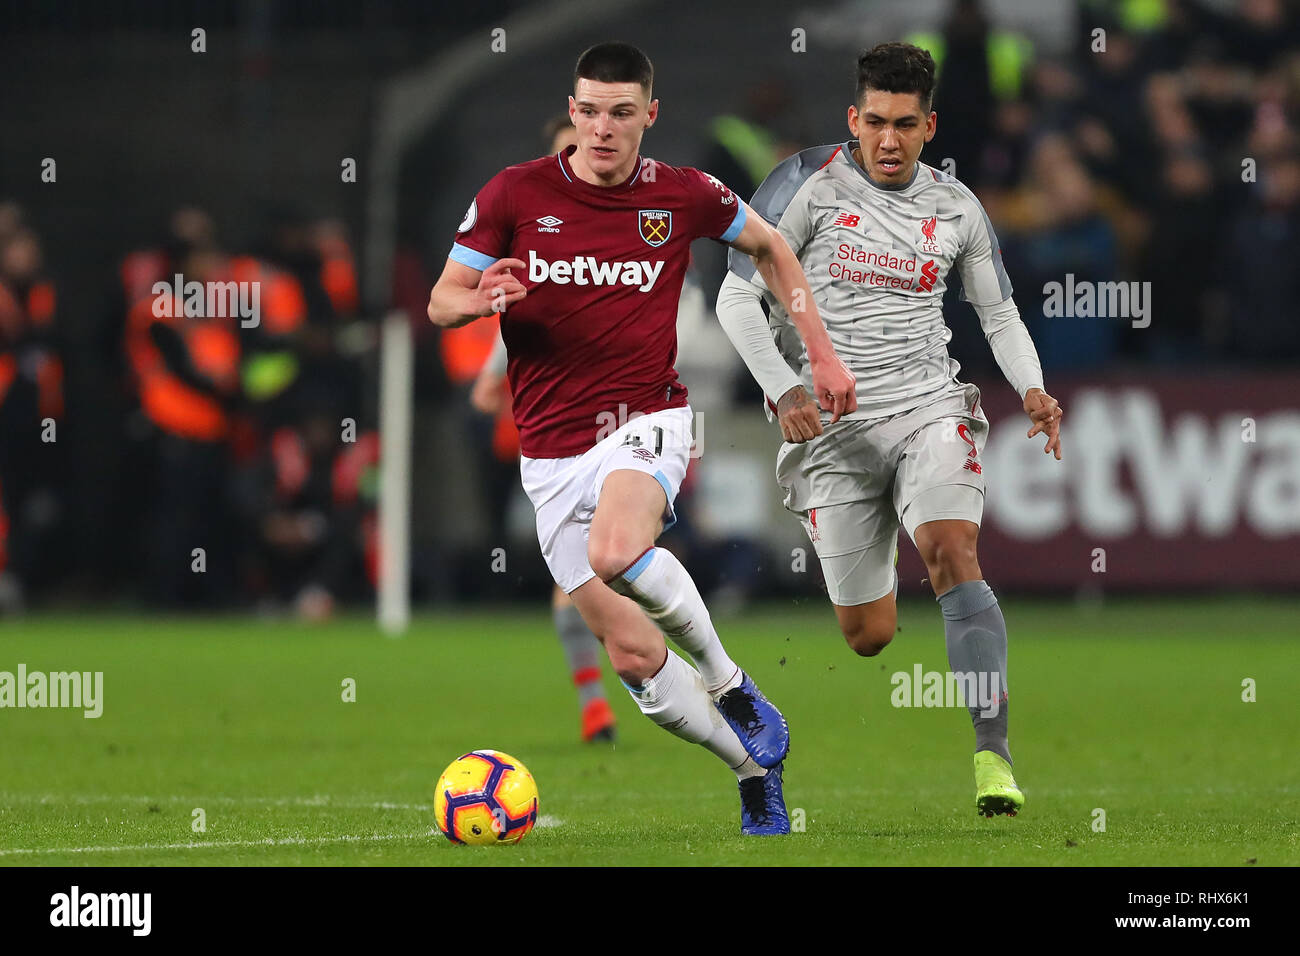 London, UK. 4th February, 2019. Declan Rice of West Ham United beats  Roberto Firmino of Liverpool - West Ham United v Liverpool, Premier League,  London Stadium, London (Stratford) - 4th February 2019